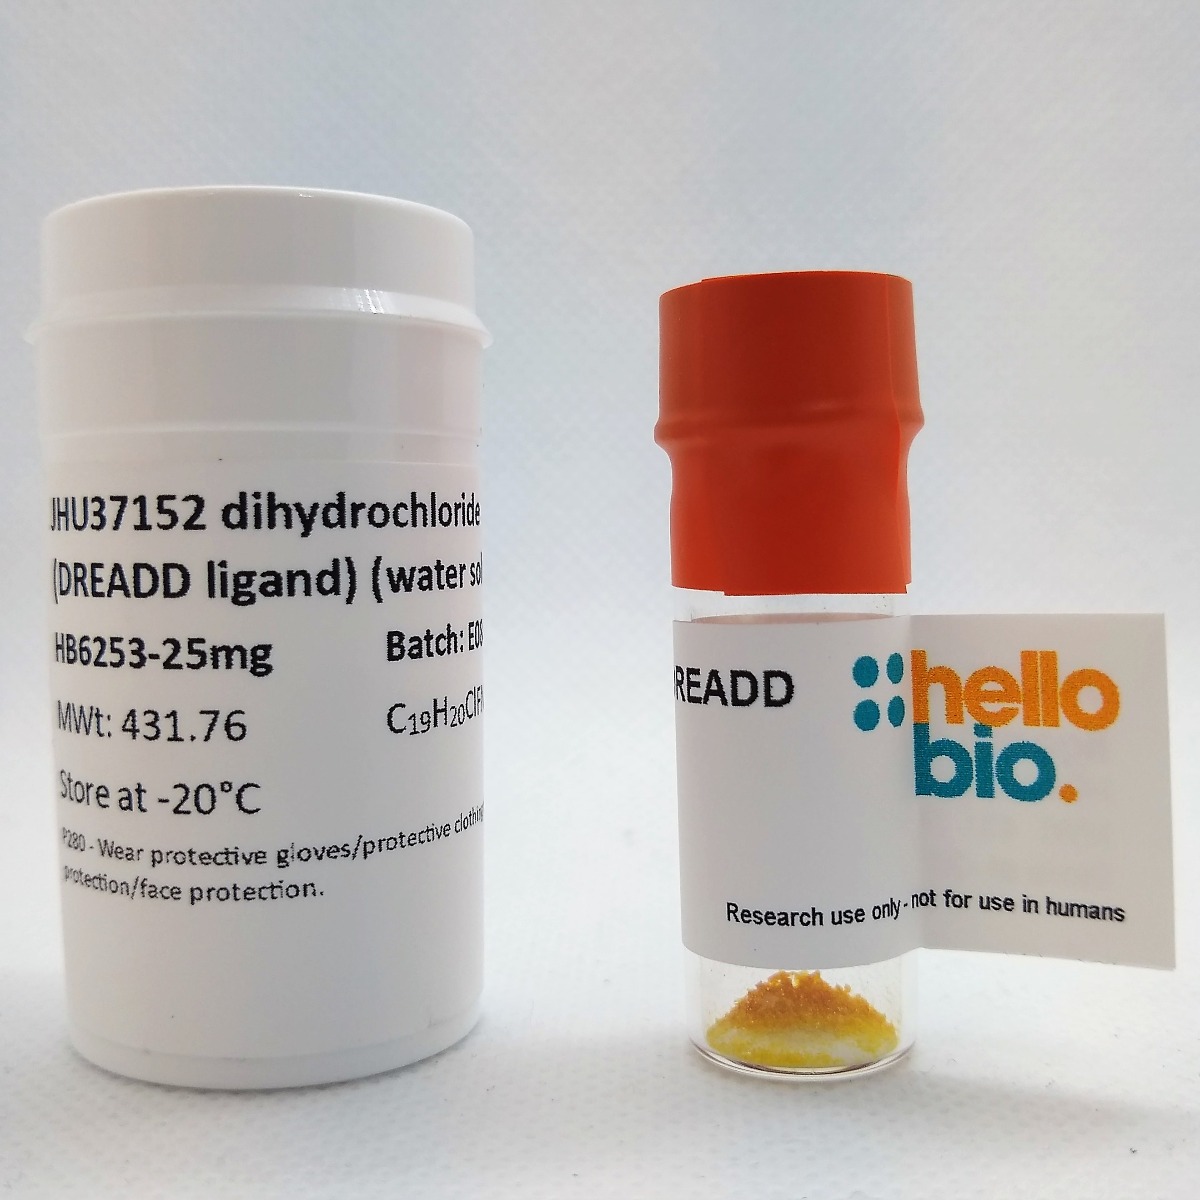 JHU37152 dihydrochloride (DREADD ligand) (water soluble) product vial image | Hello Bio